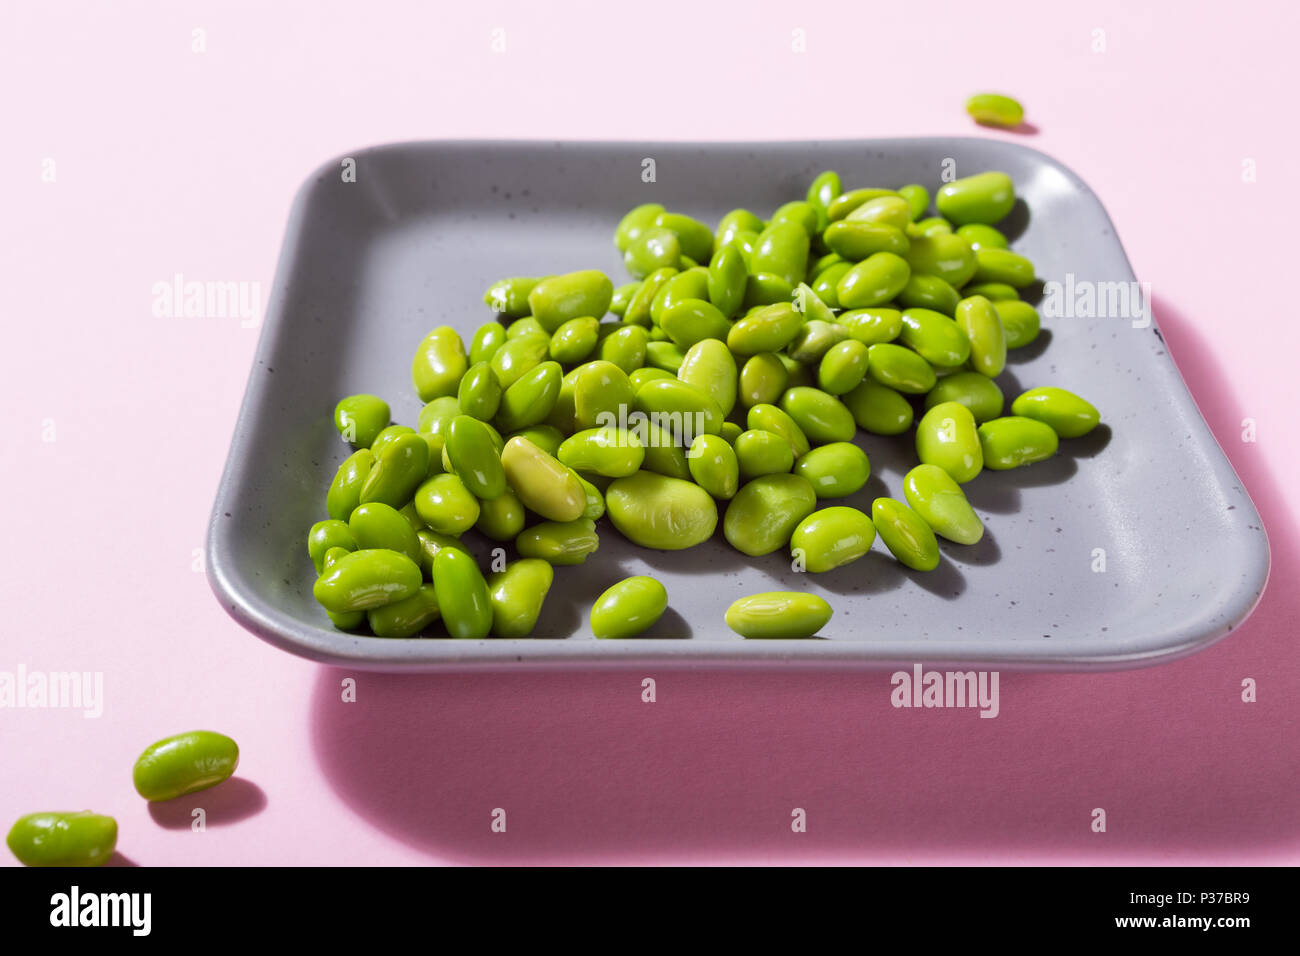 Green fresh soybeans on gray square plate on pink background. Healthy food concept with coppy space. Stock Photo